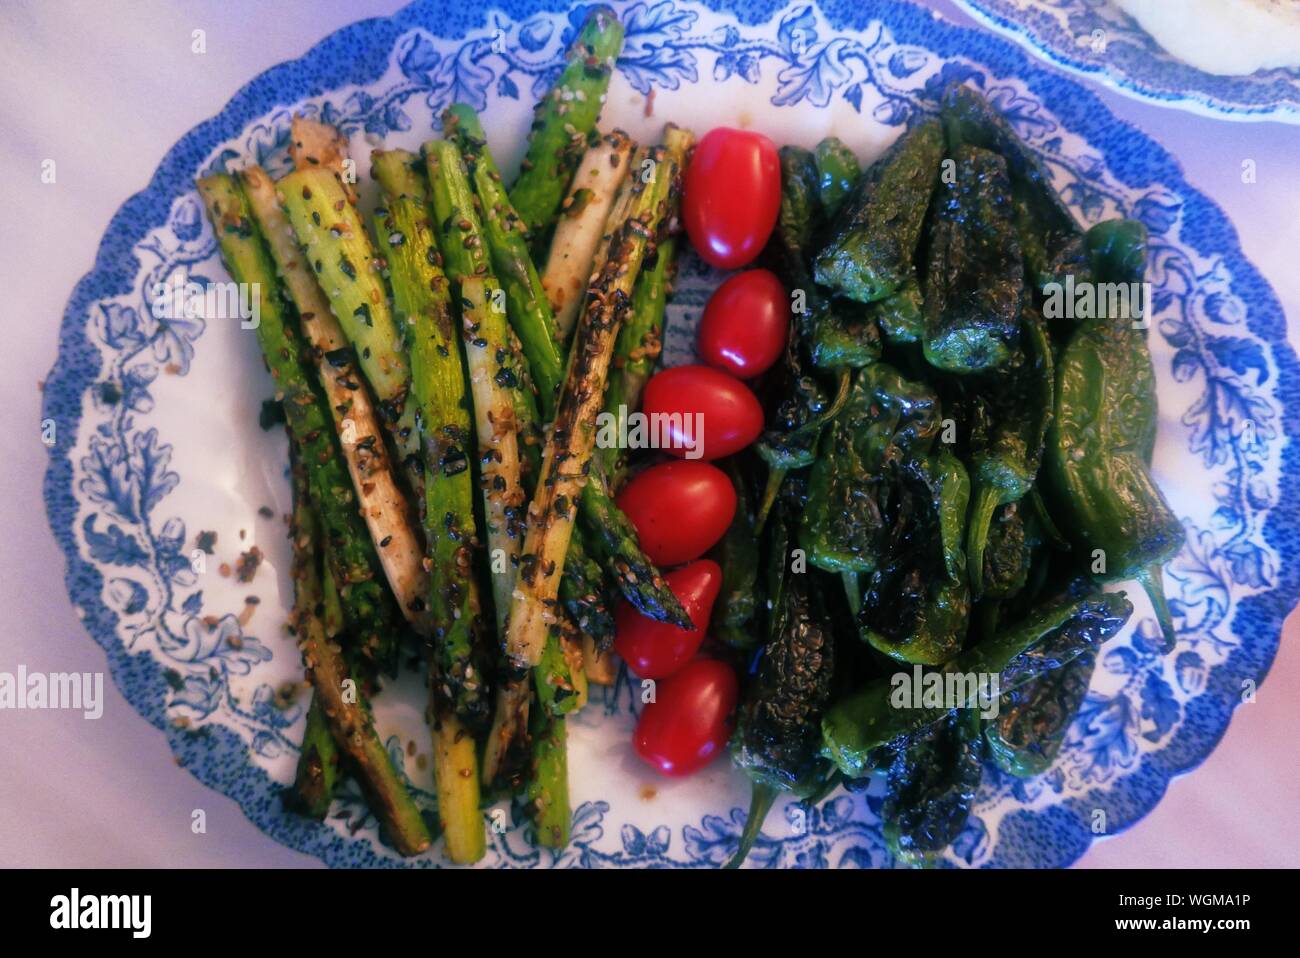 Close-up Of Grilled Asparagus With Cherry Tomato And Green Chili Pepper In Plate Stock Photo